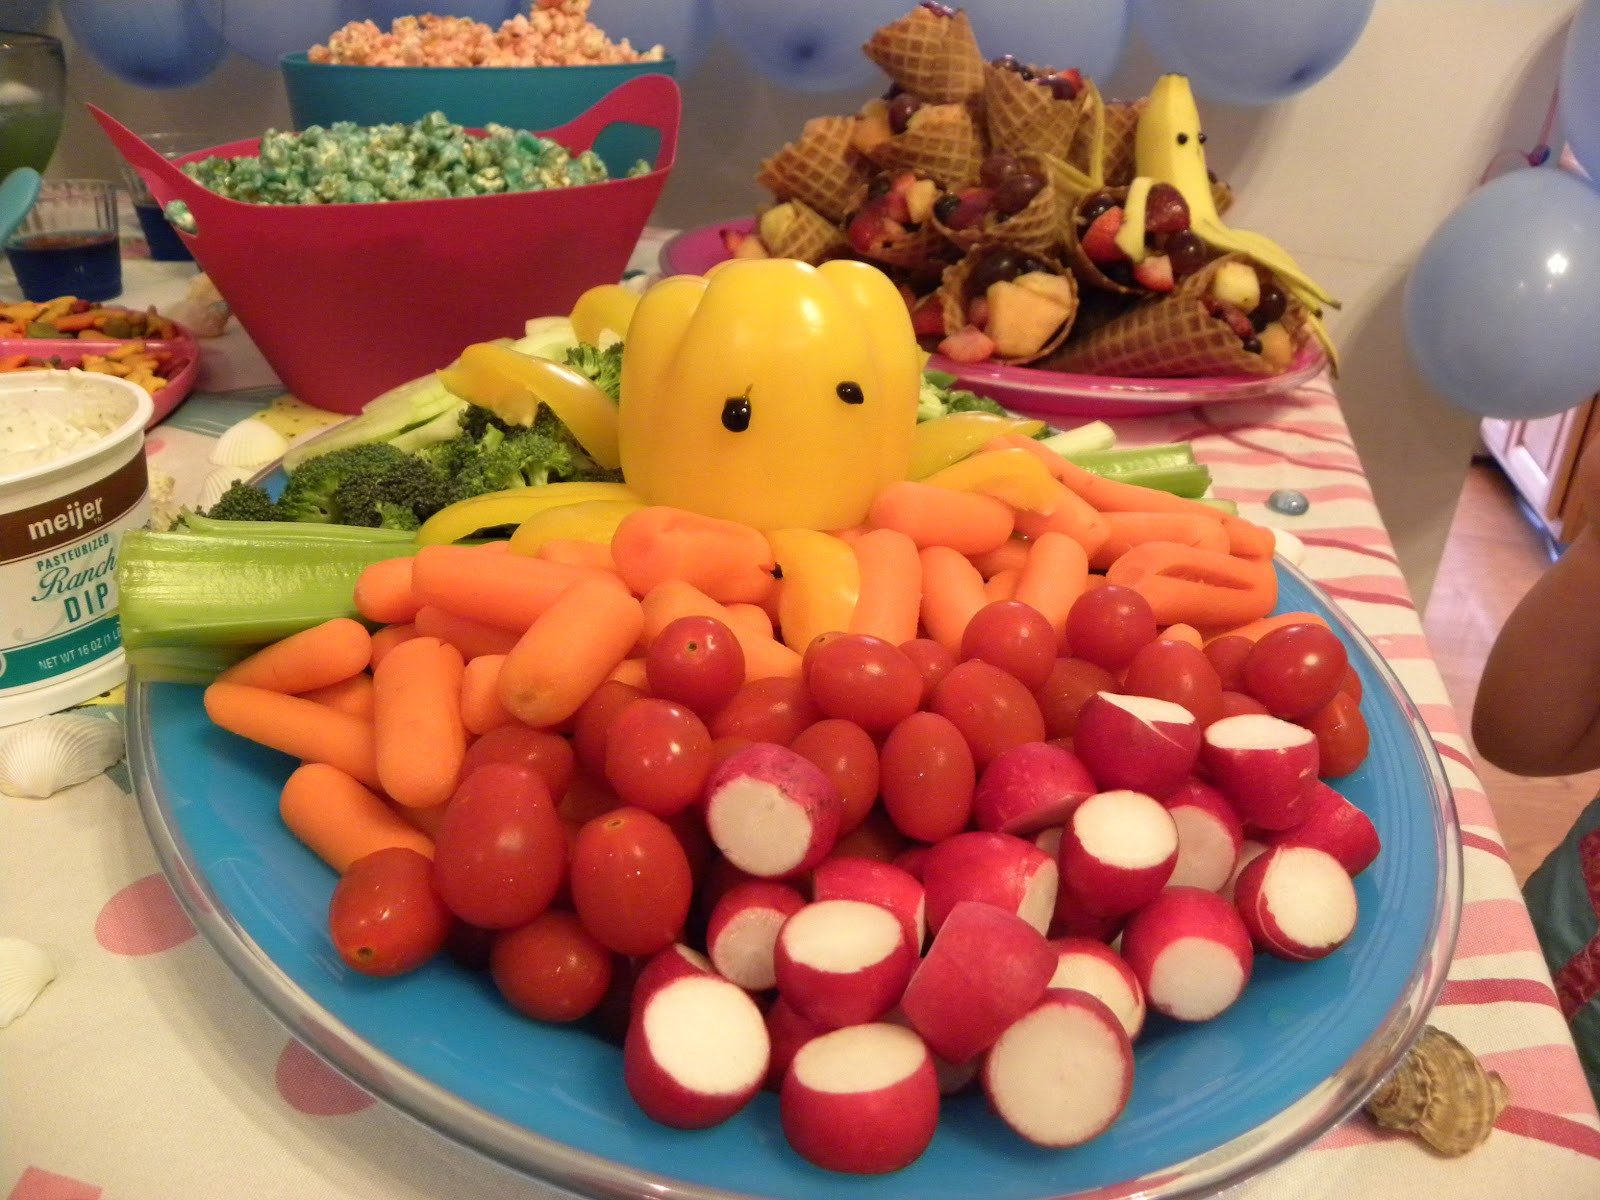 Little Mermaid Party Food Ideas
 402 Center Street Designs The Mermaid Party